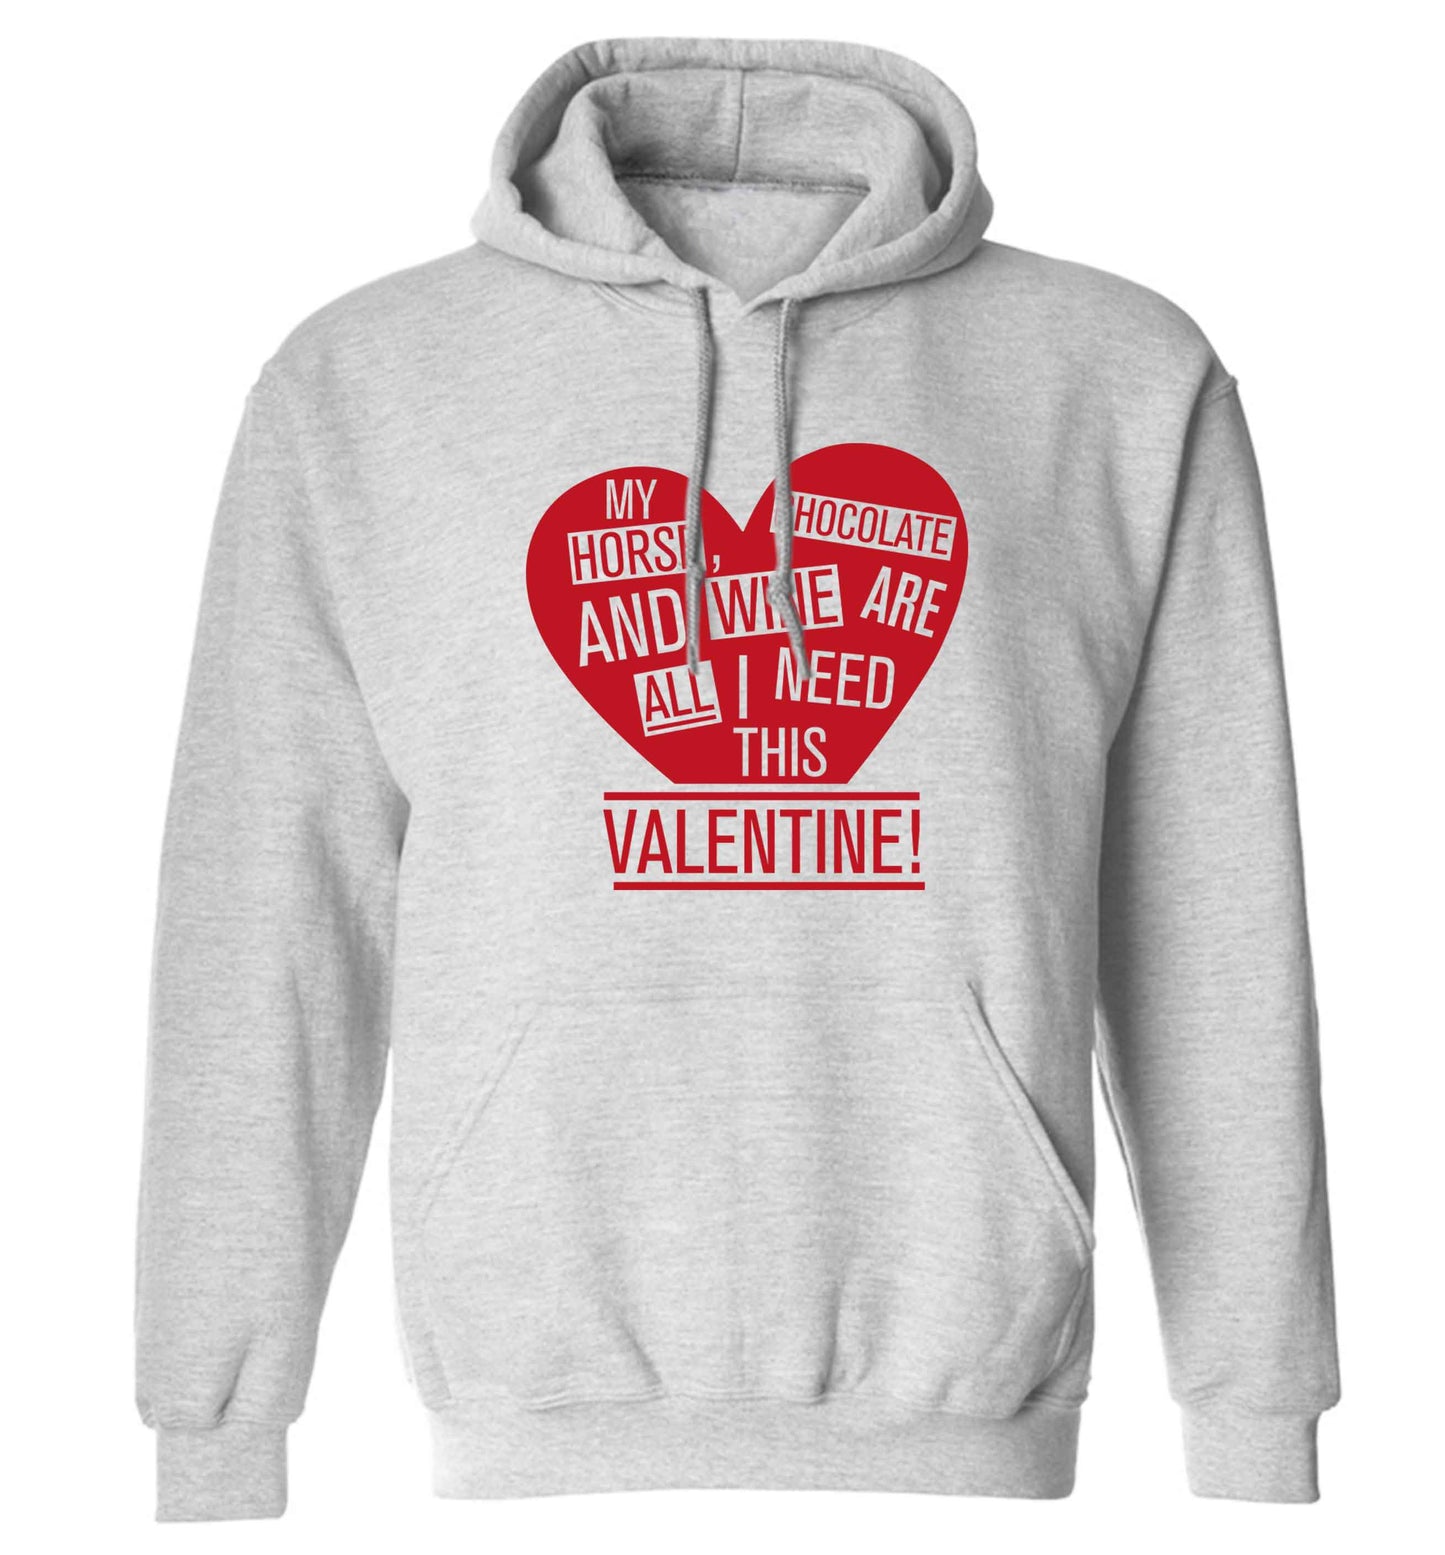 My horse chocolate and wine are all I need this valentine adults unisex grey hoodie 2XL